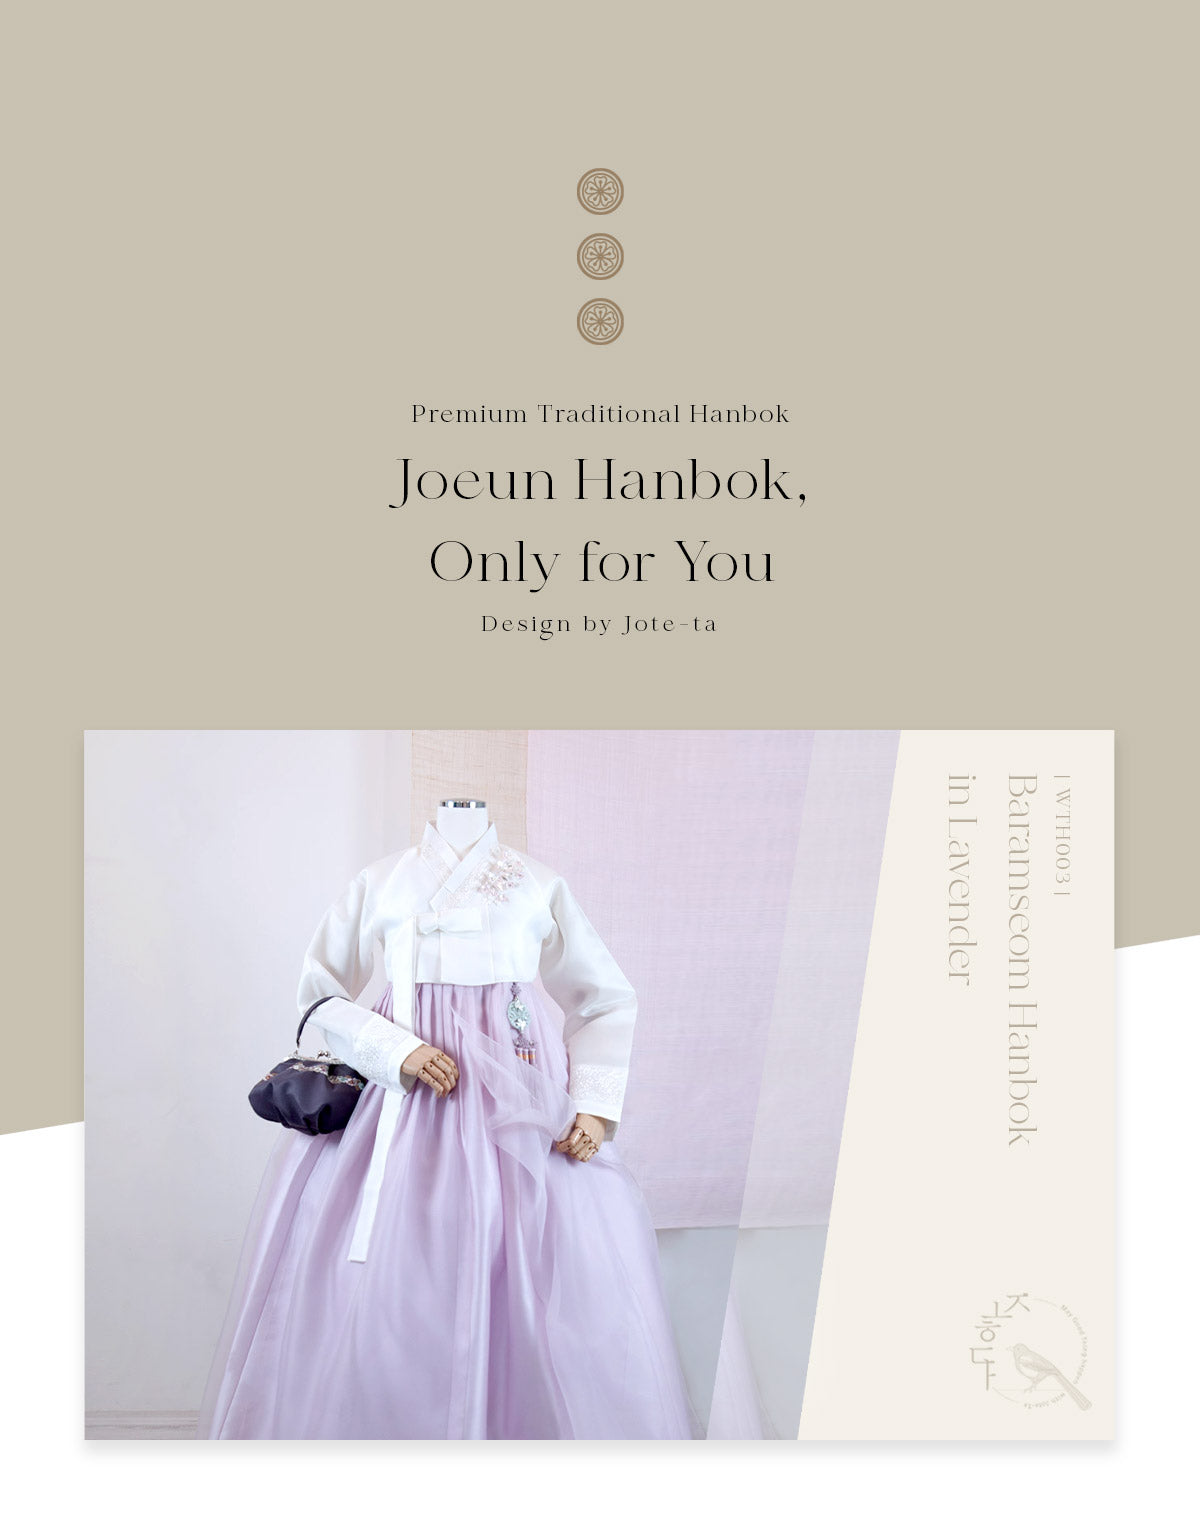 This is Baramseom woman hanbok in lavender